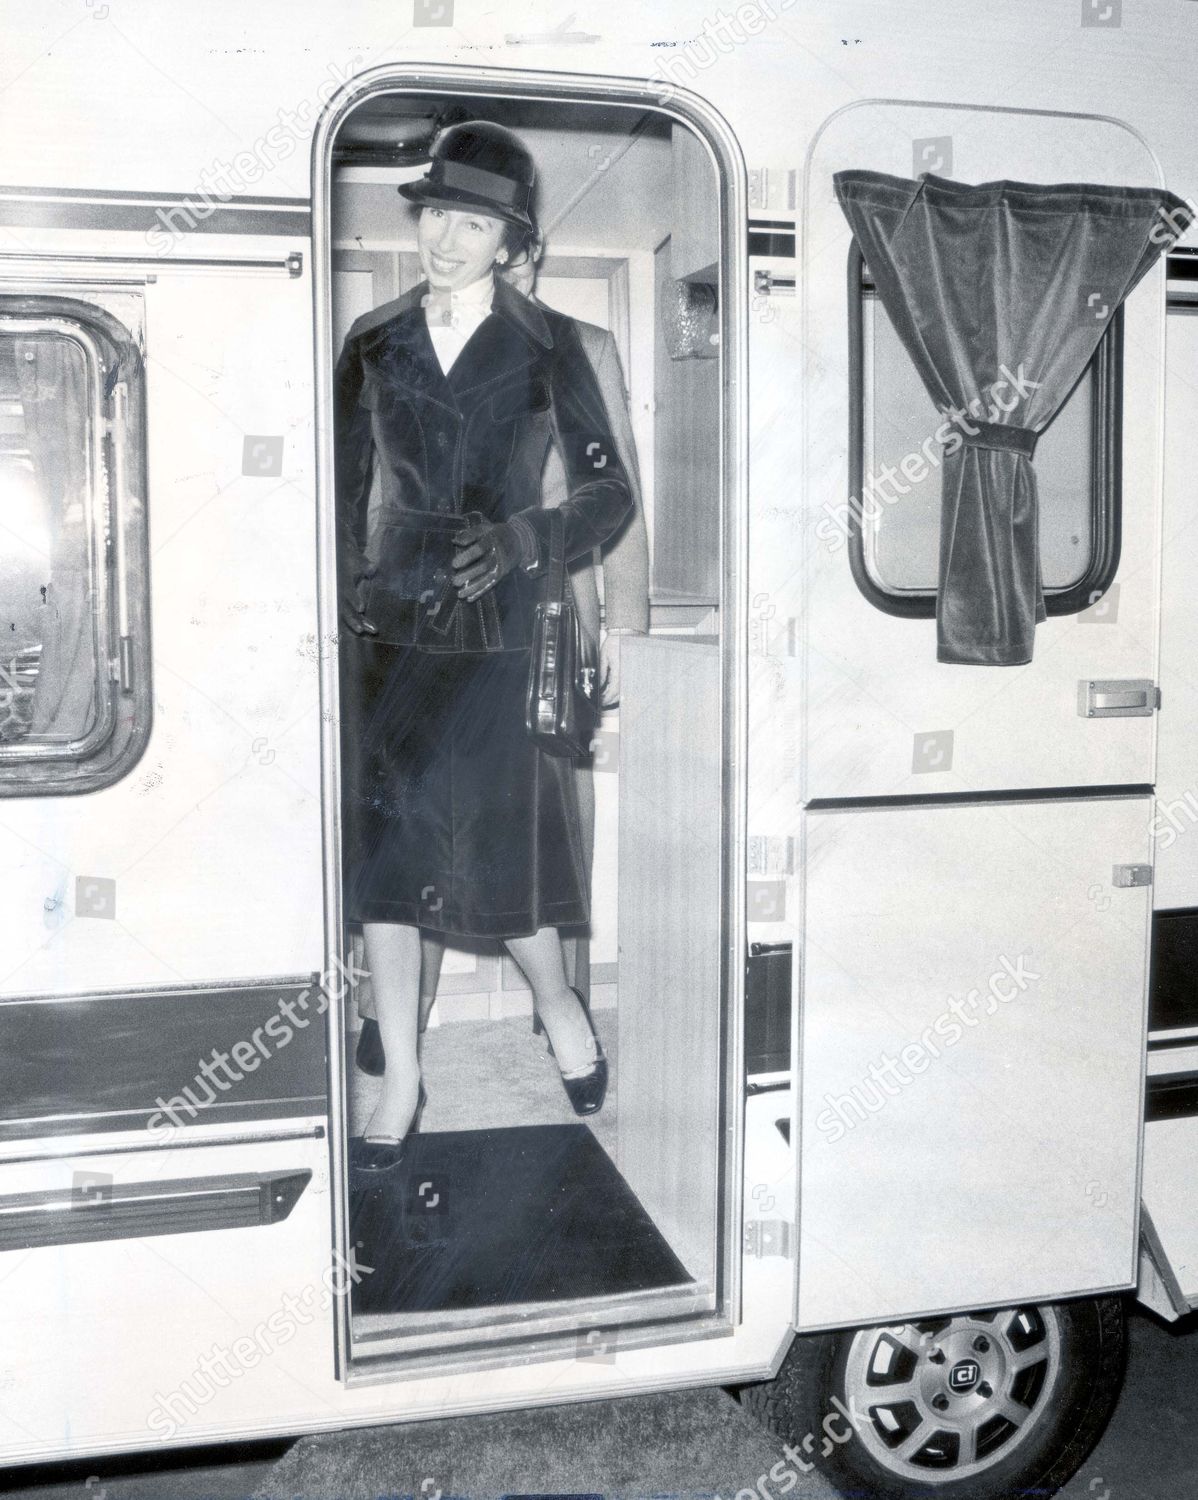 princess-anne-now-princess-royal-1979-picture-shows-princess-anne-revealing-an-unexpected-knowledge-of-caravans-she-told-officials-at-the-caravan-camping-holiday-show-the-competitive-horse-world-spends-a-lot-of-time-on-the-road-and-caravans-shutterstock-editorial-891826a.jpg